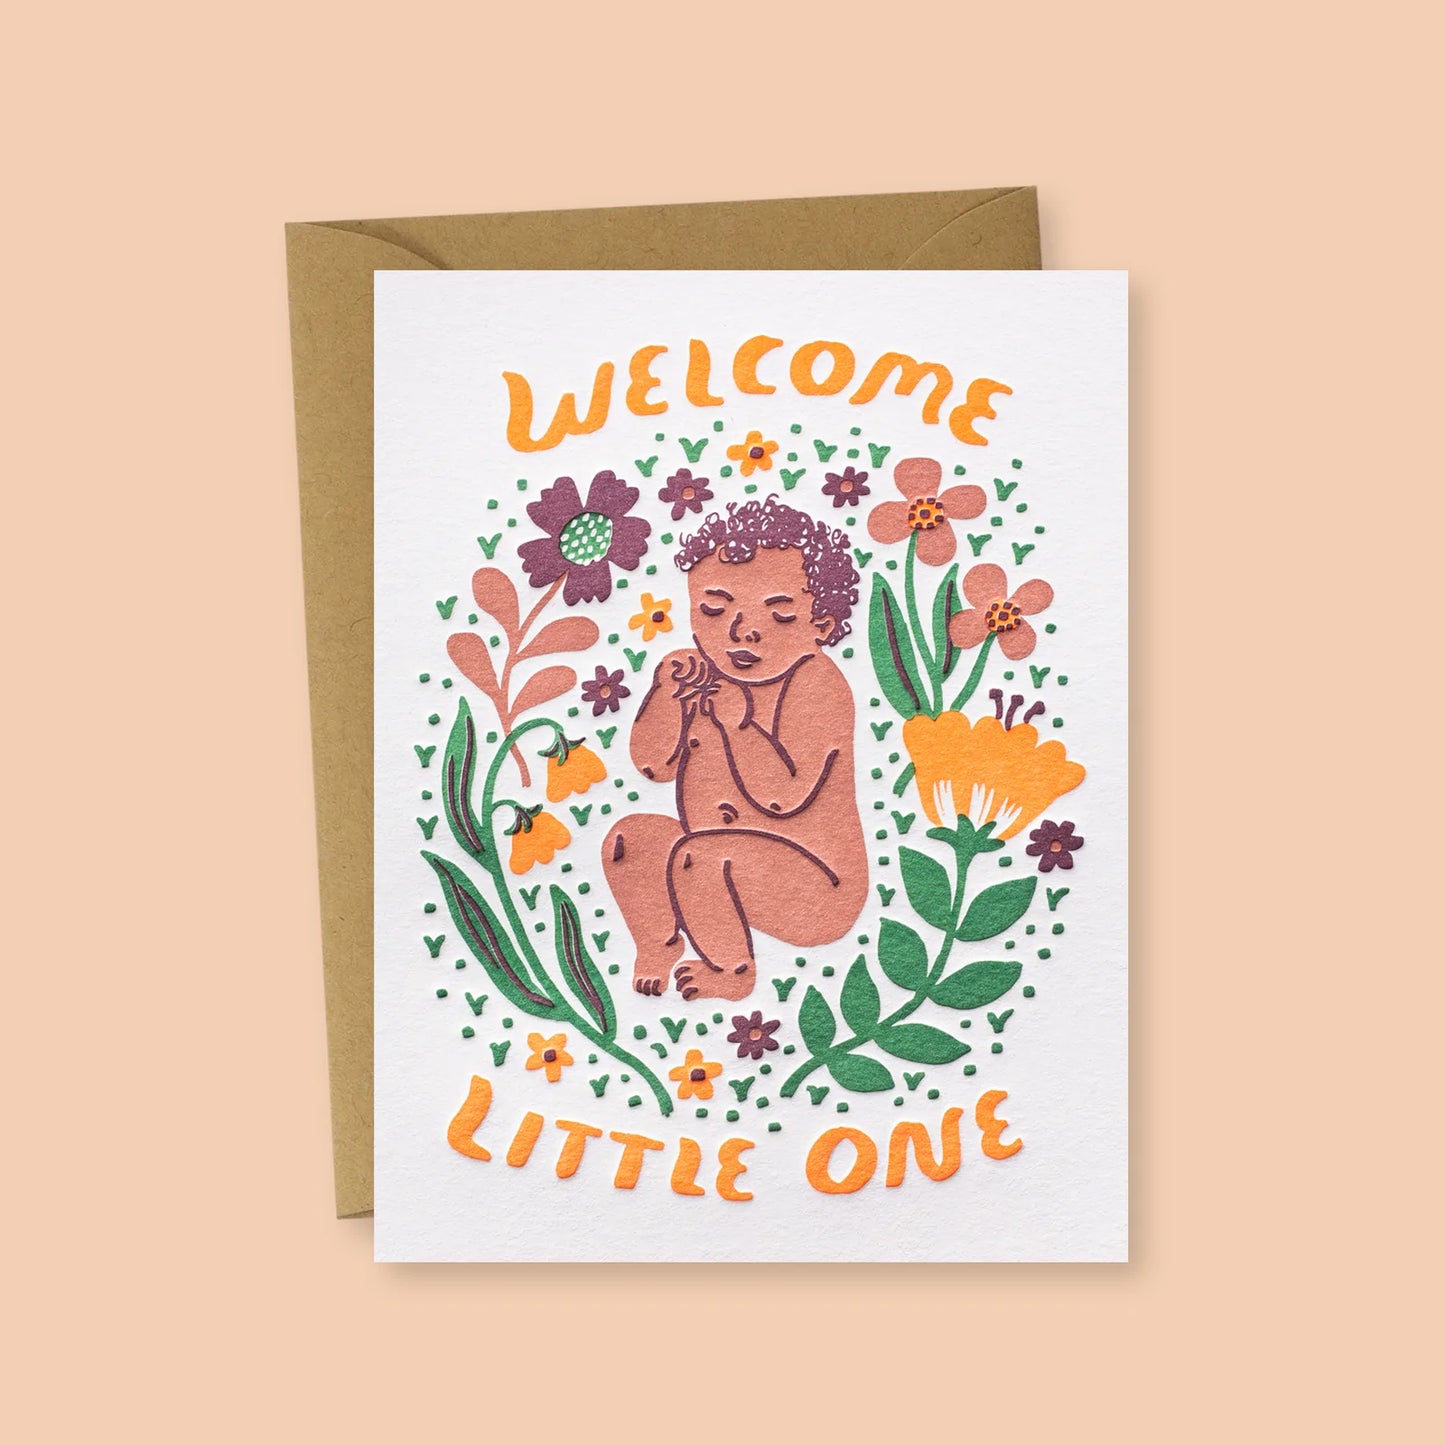 Phoebe Wahl Greeting Card — Welcome Little One (2)